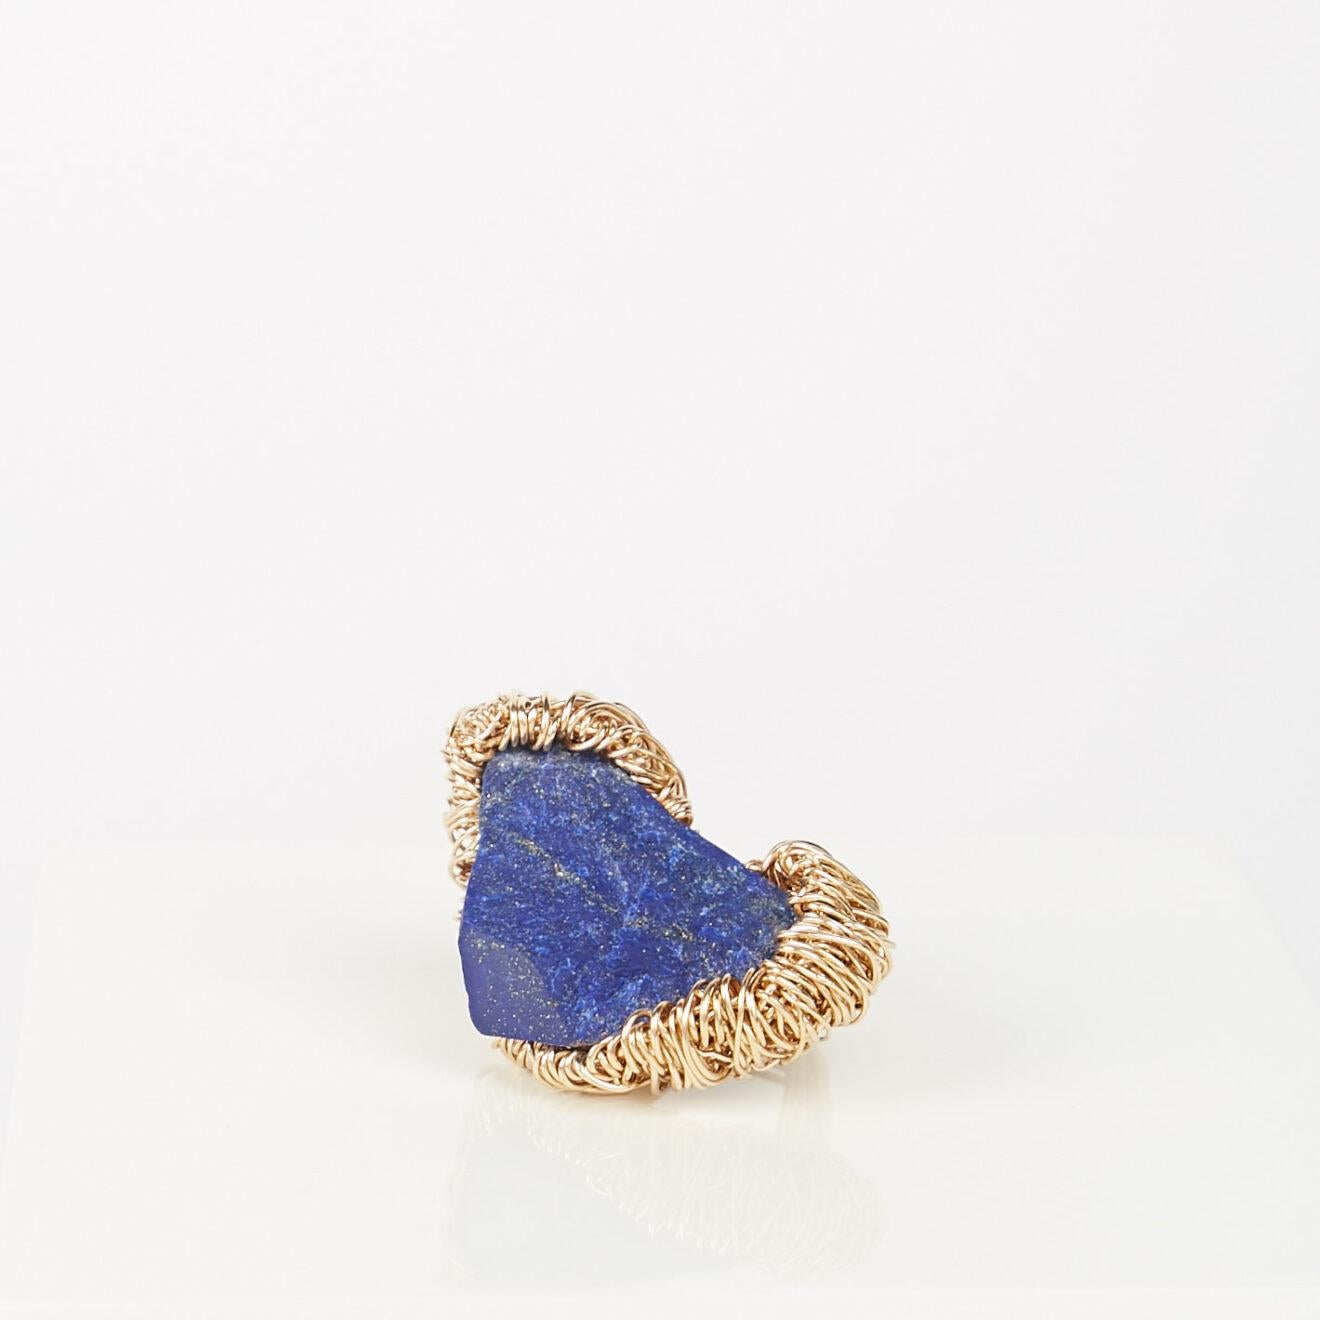 Sheila Westera's Liberty Ring is a gorgeous combination of 14k Gold and rough Lapis Lazuli. 

The Liberty Ring features her signature wire-work technique.  Using 14k yellow gold wire, she weaves to encircle rough stones in 'nests'. 

An utterly